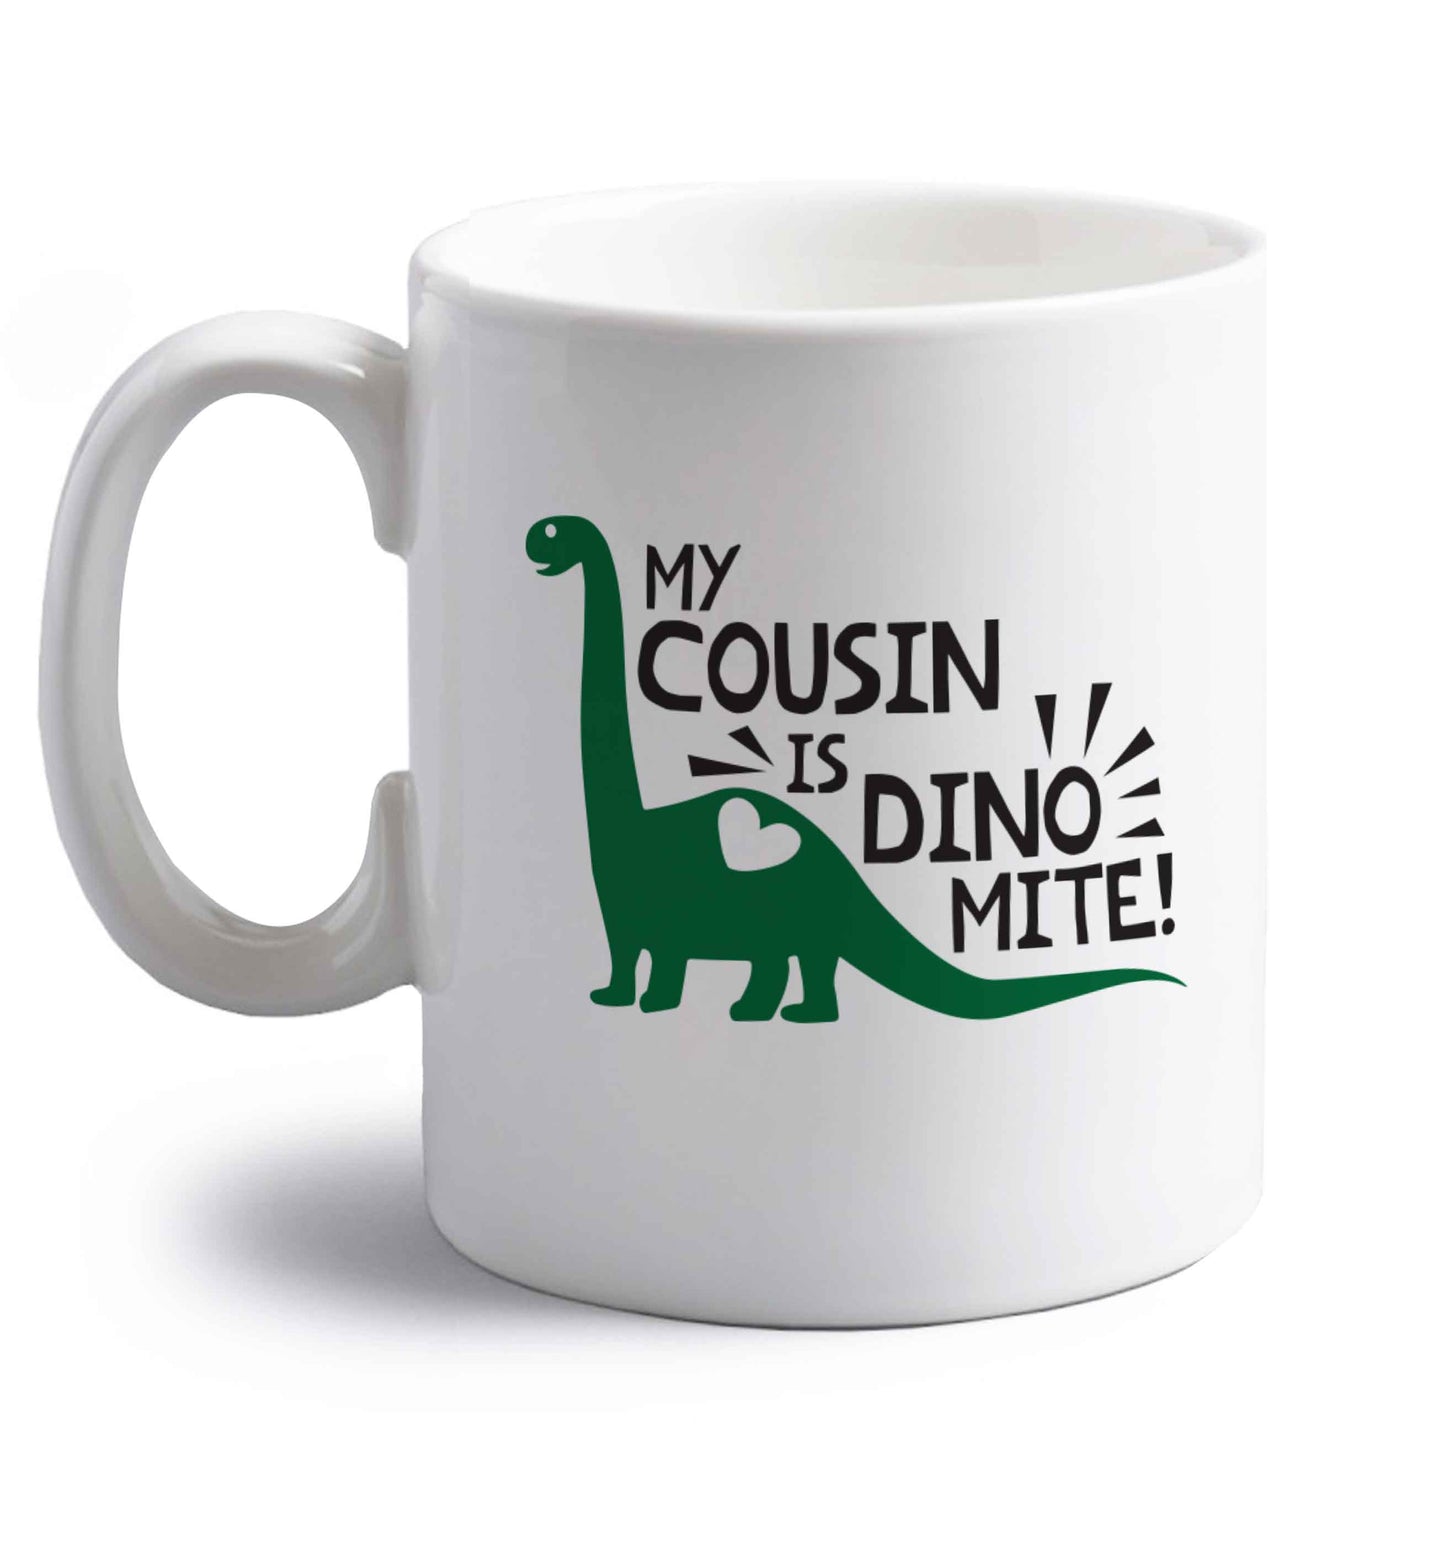 My cousin is dinomite! right handed white ceramic mug 